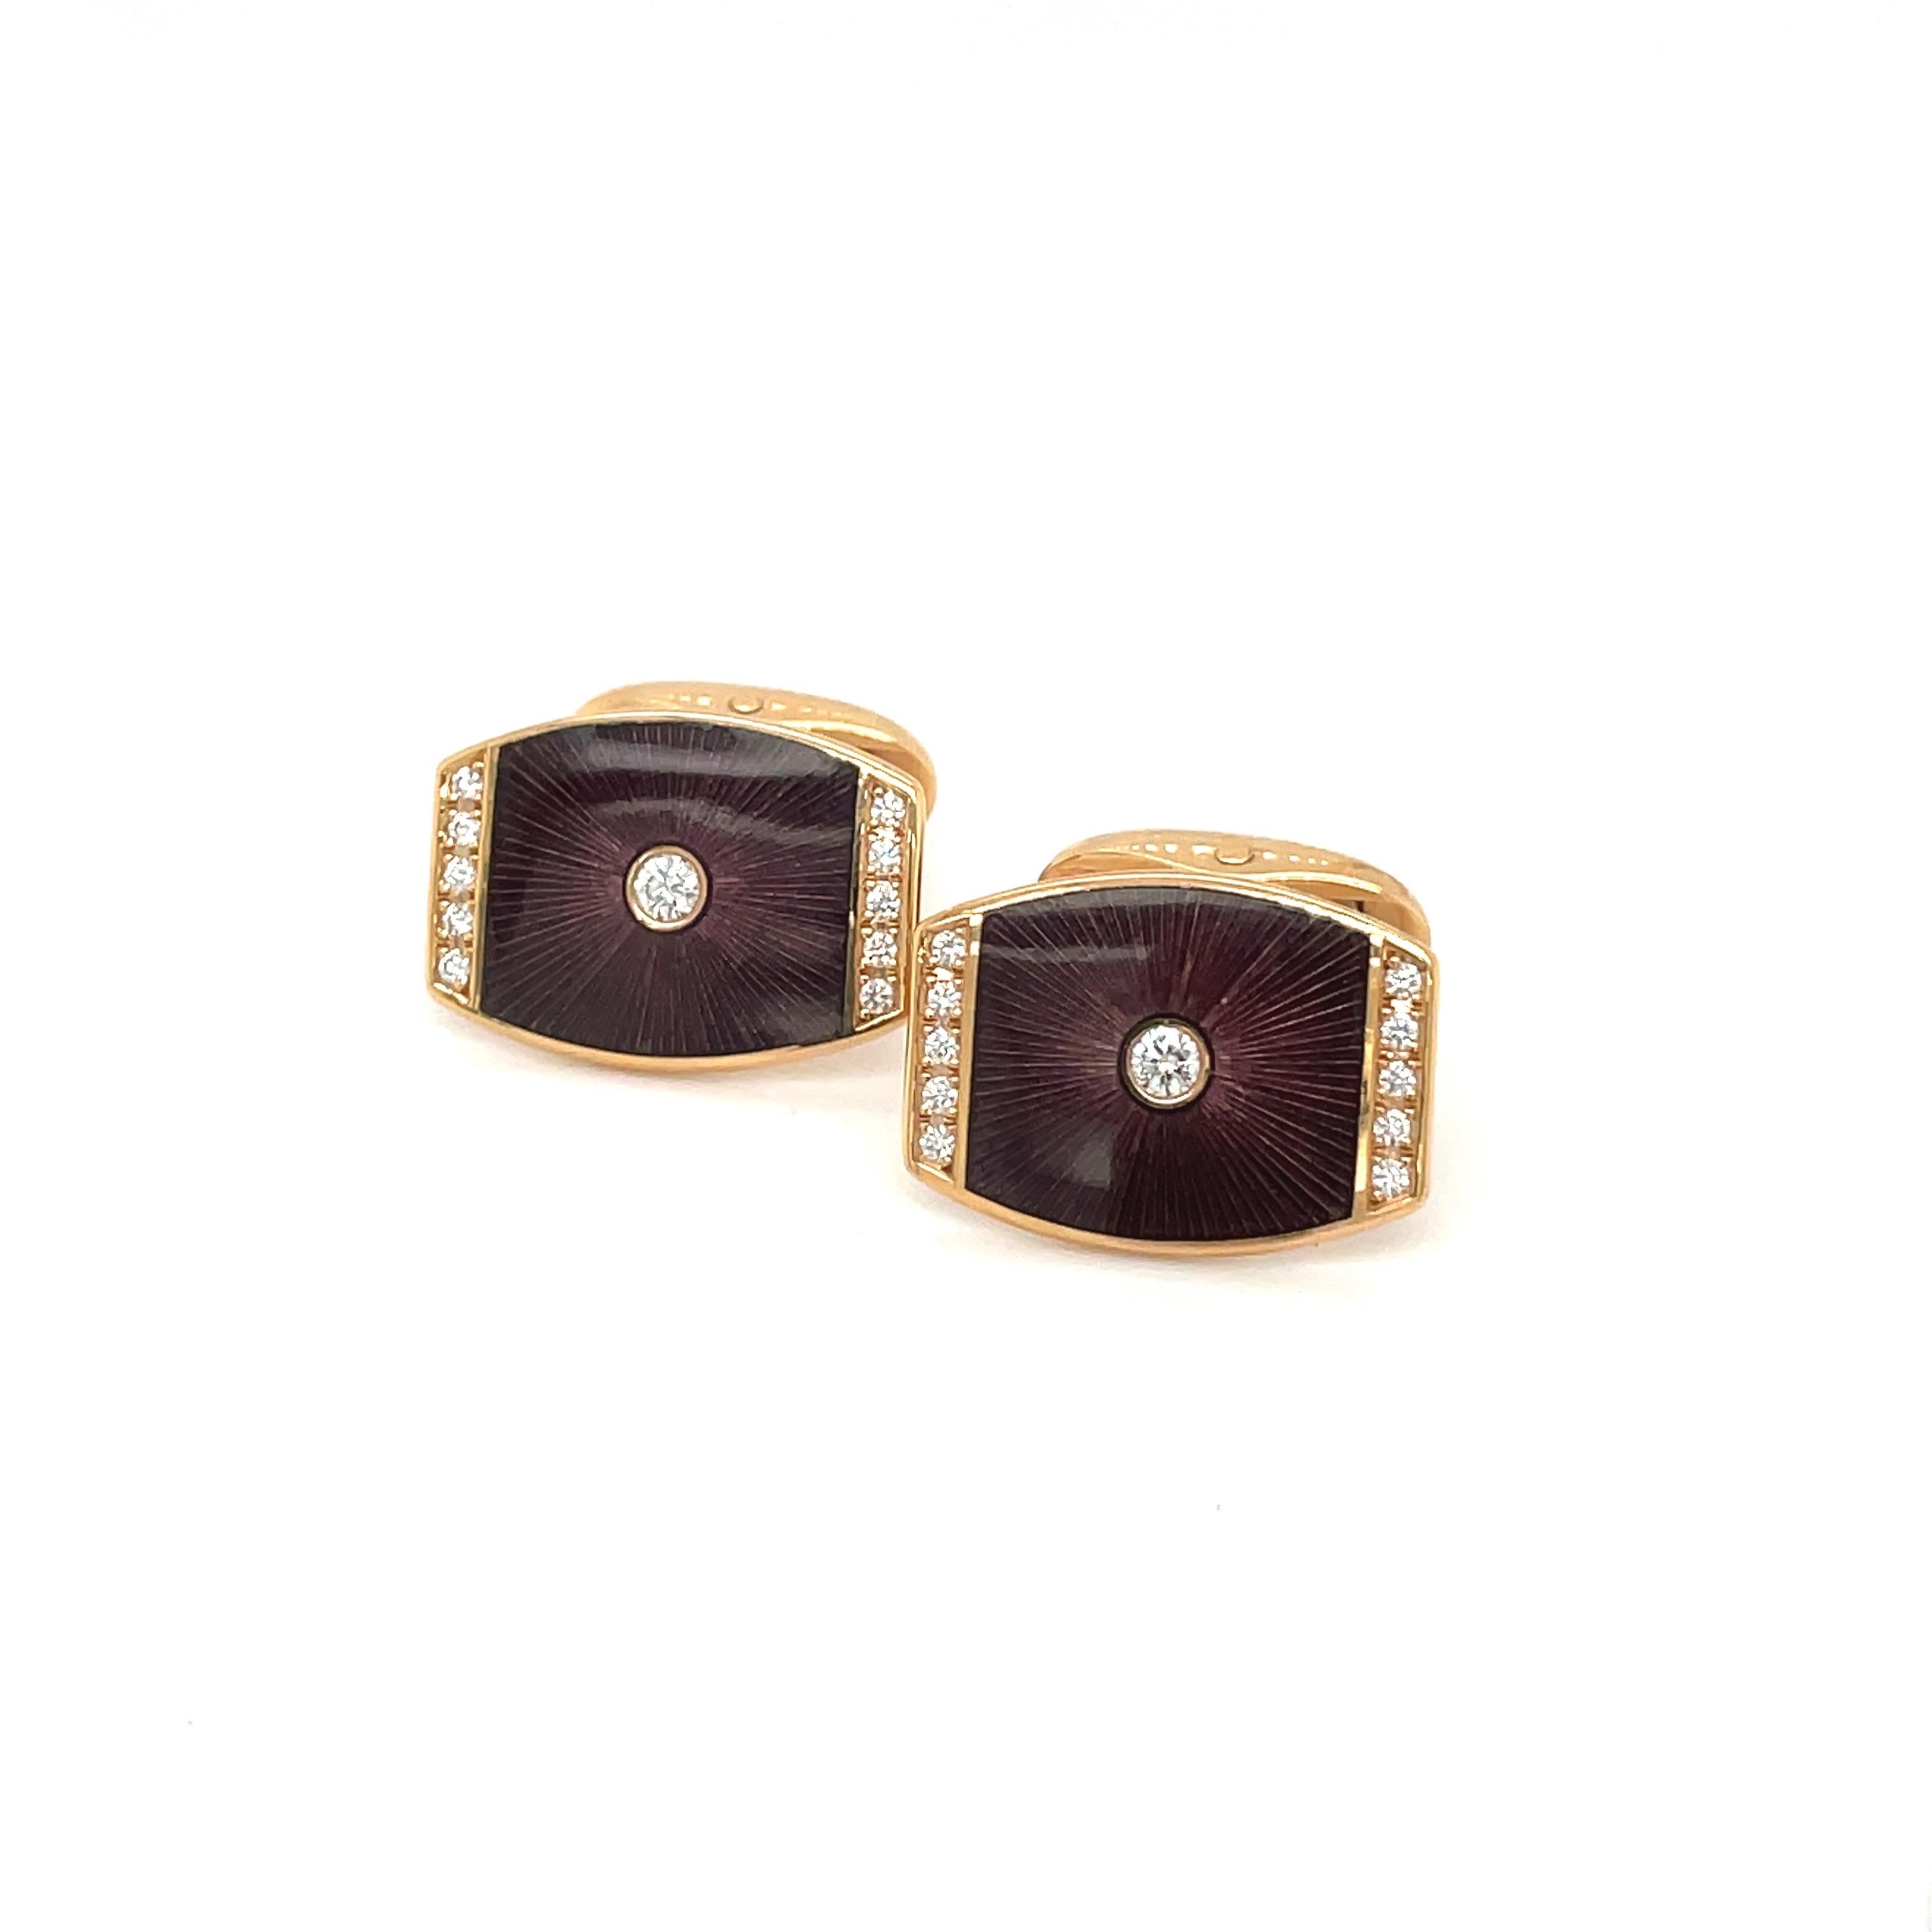 Art Nouveau Faberge 18kt Rose Gold Enamel and Diamond 0.32ct Cuff Links #135/1000 For Sale